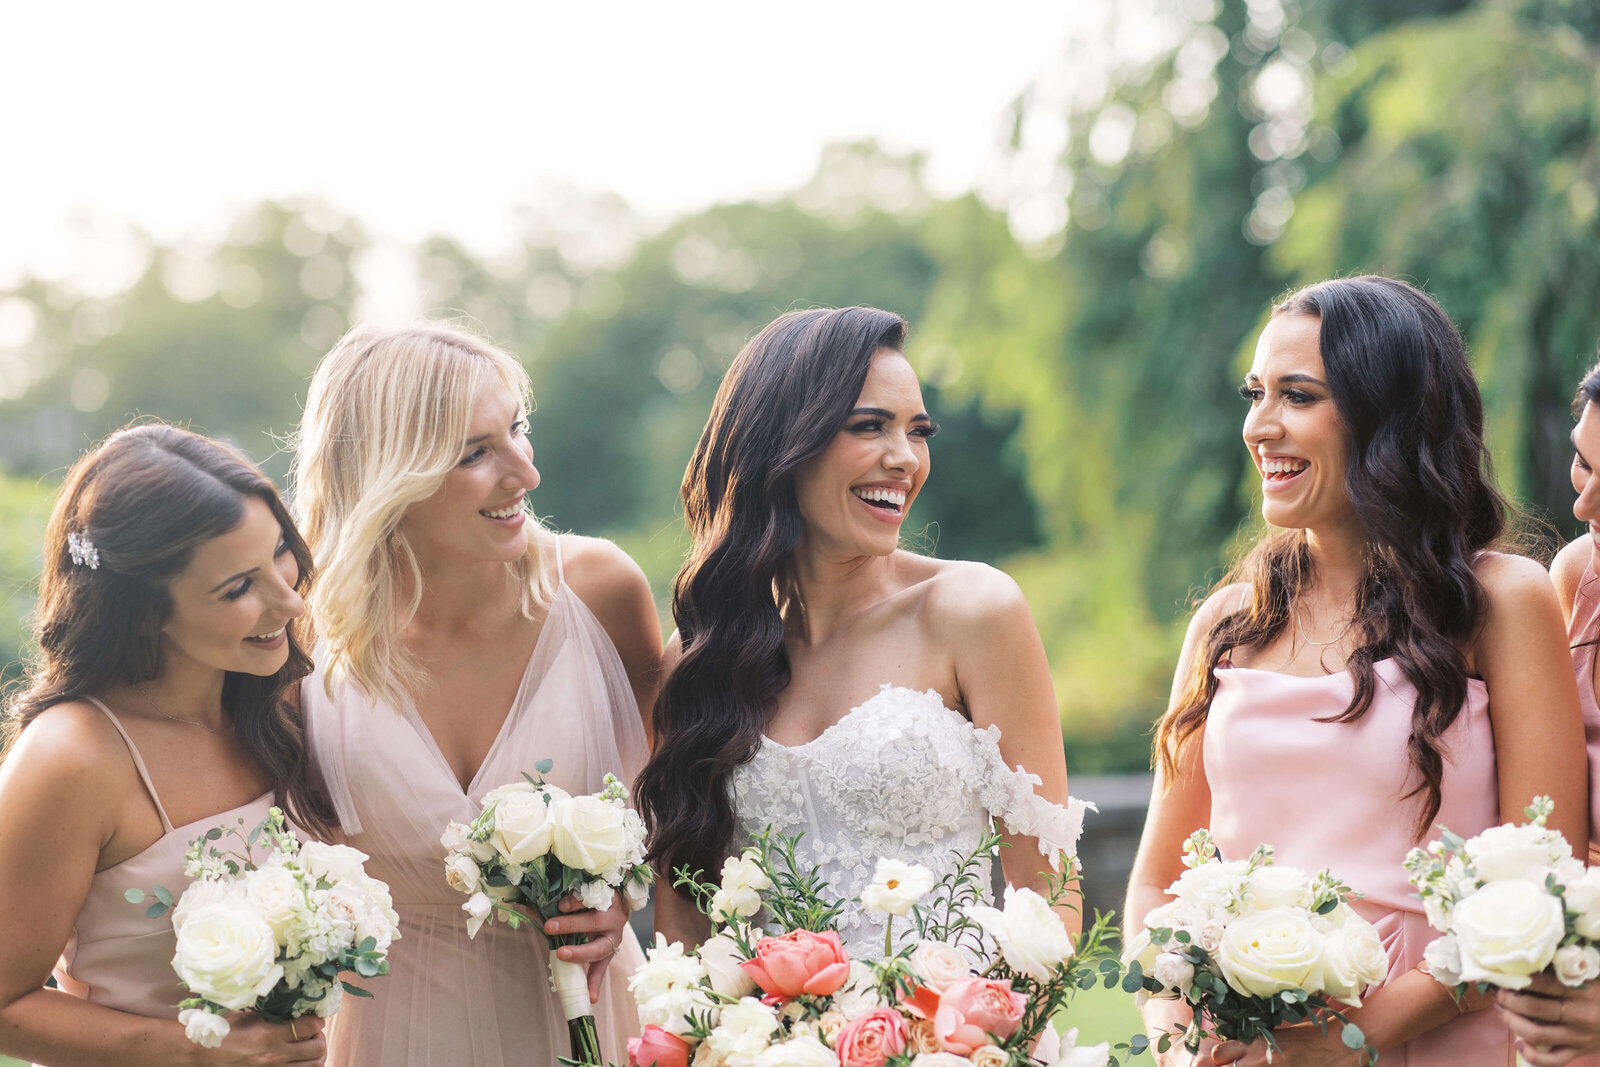 Bride smiles with her bridesmaids on her wedding day.